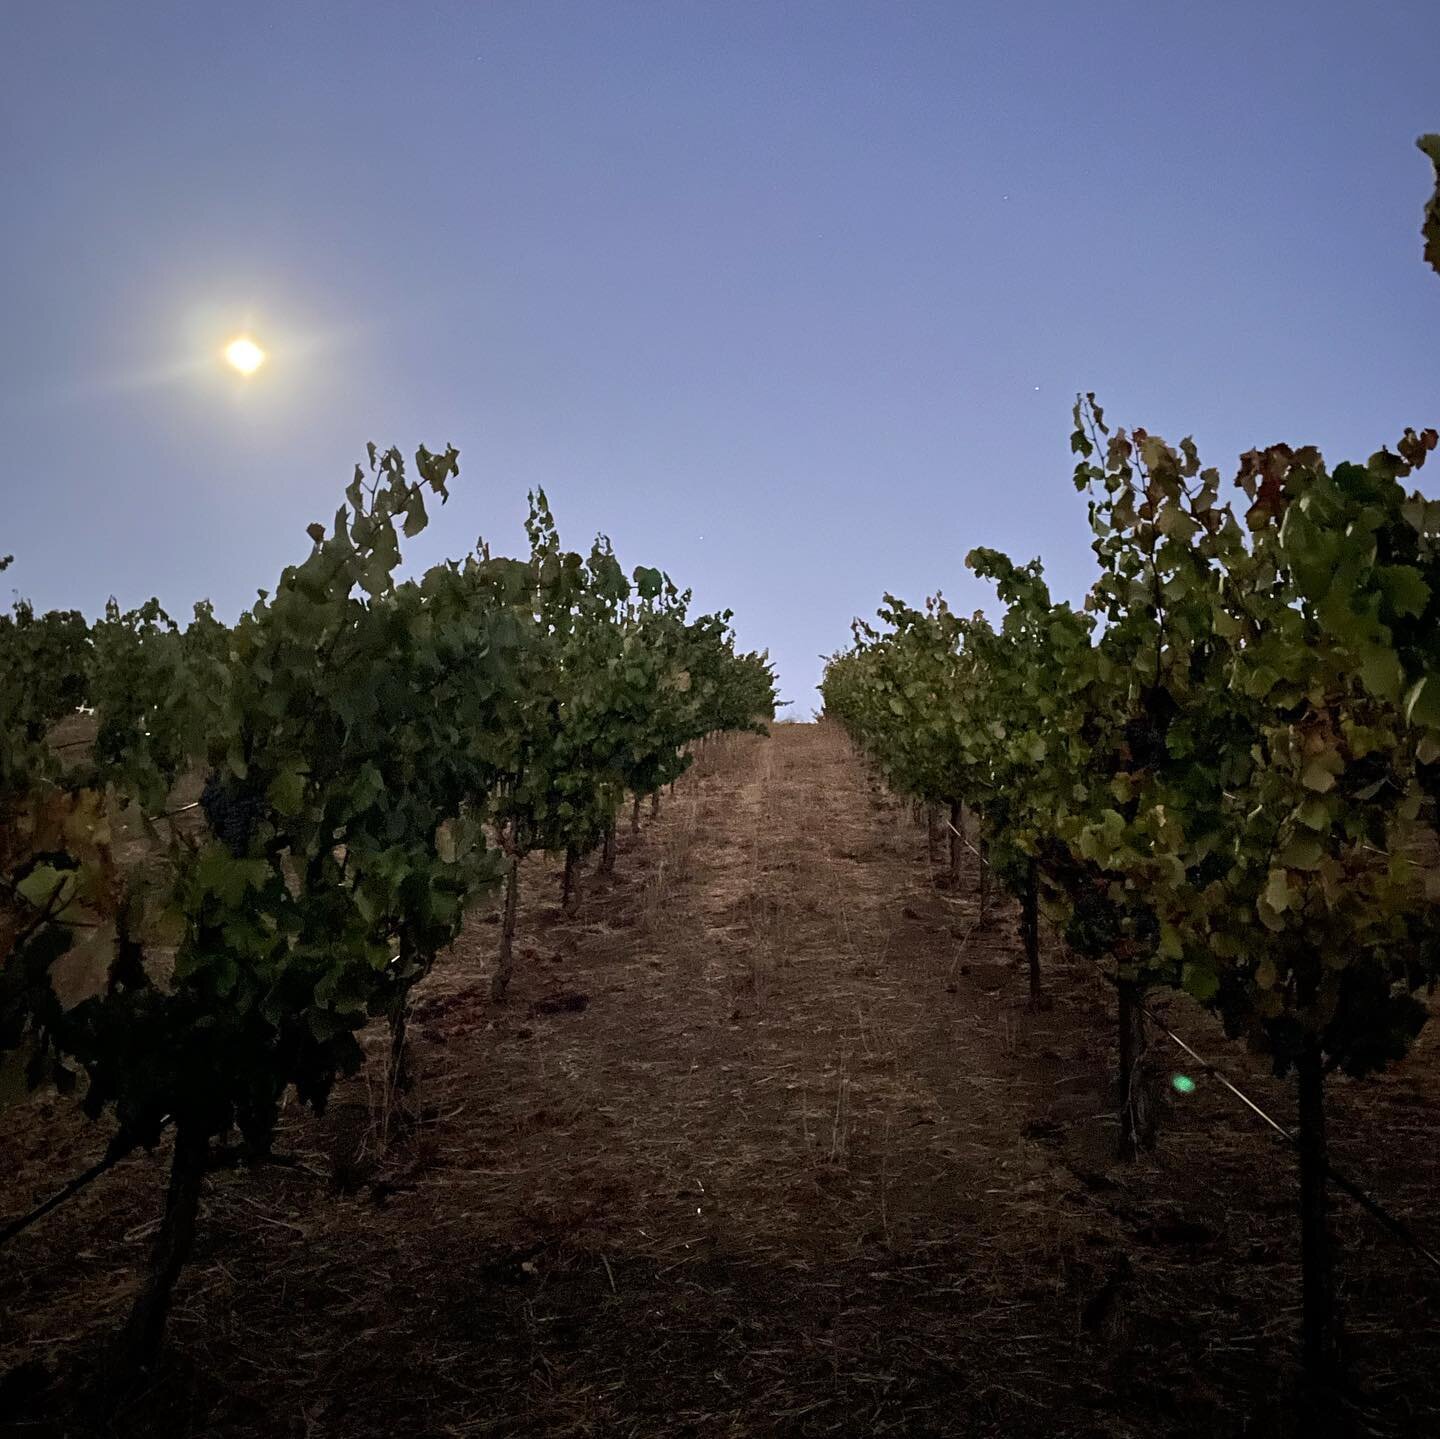 A little moonlight sampling this morning at RNF. Second pick of the season coming Saturday, including my favorite block - The Noble Savage (see pic 2) - headtrained, ownrooted, dry farmed Grenache. This block is where our 2018 Hokum hails from. #nofi